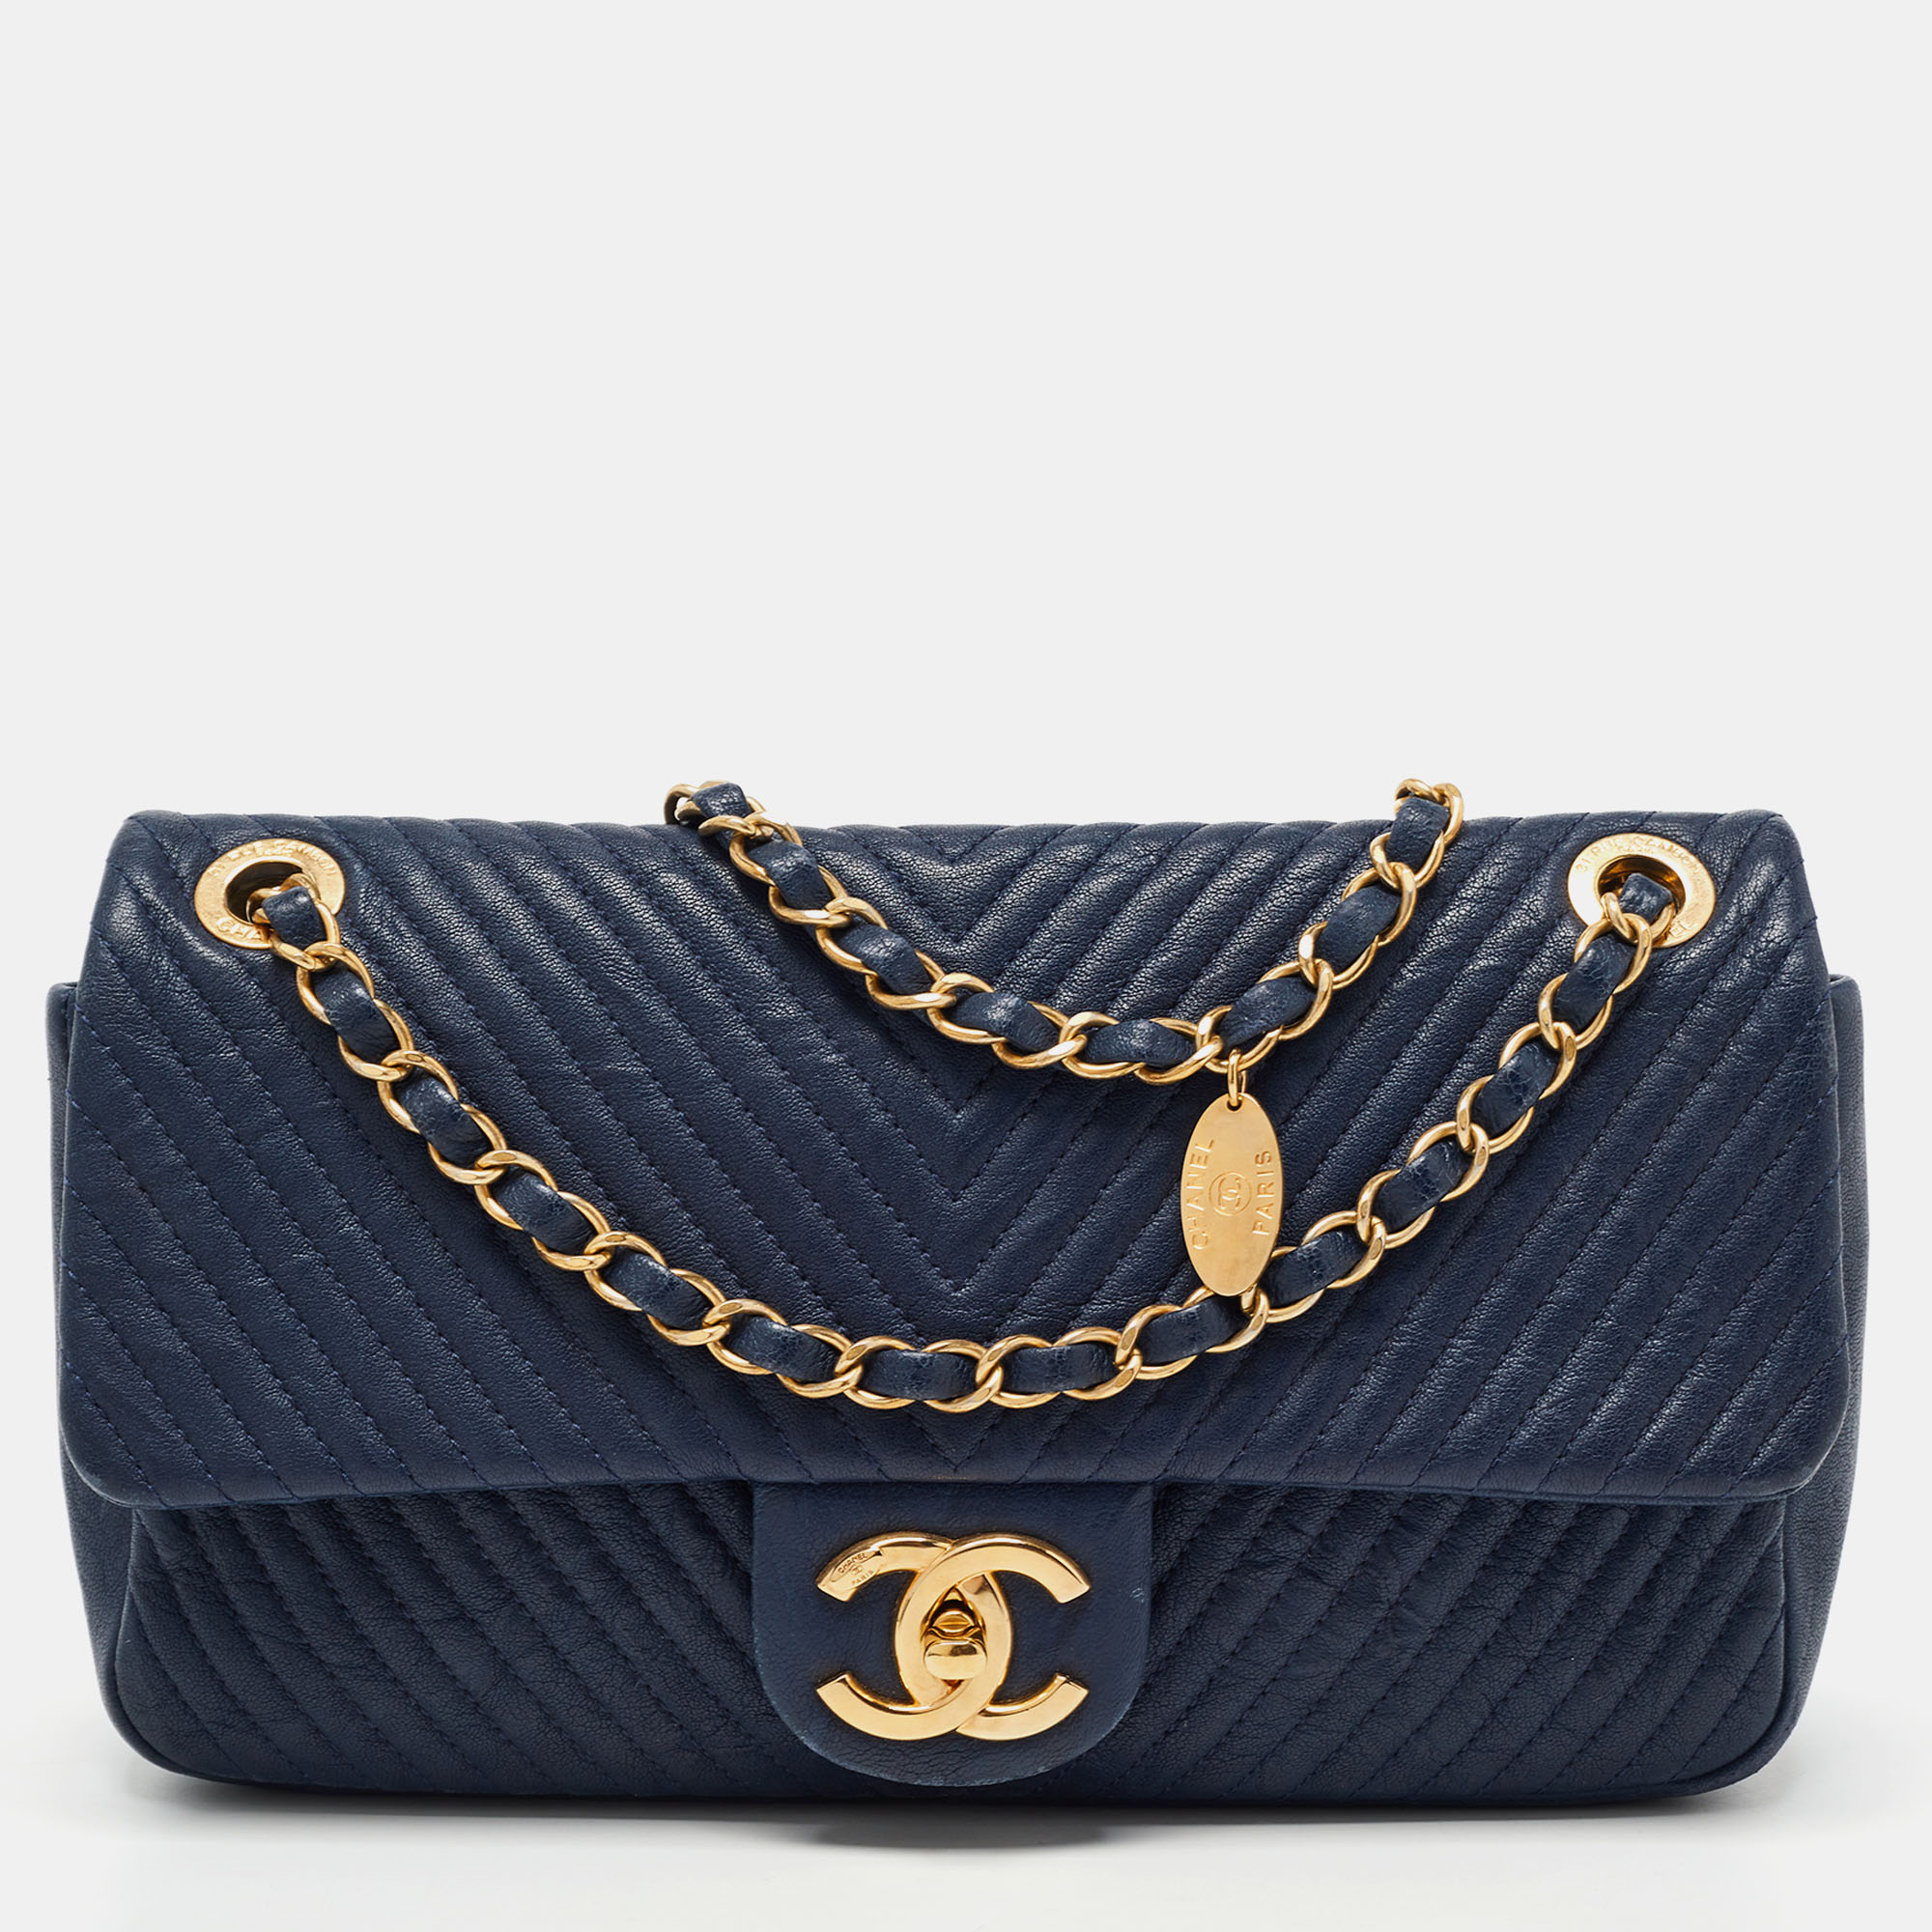 Pre-owned Chanel Navy Blue Chevron Leather Medallion Charm Flap Bag